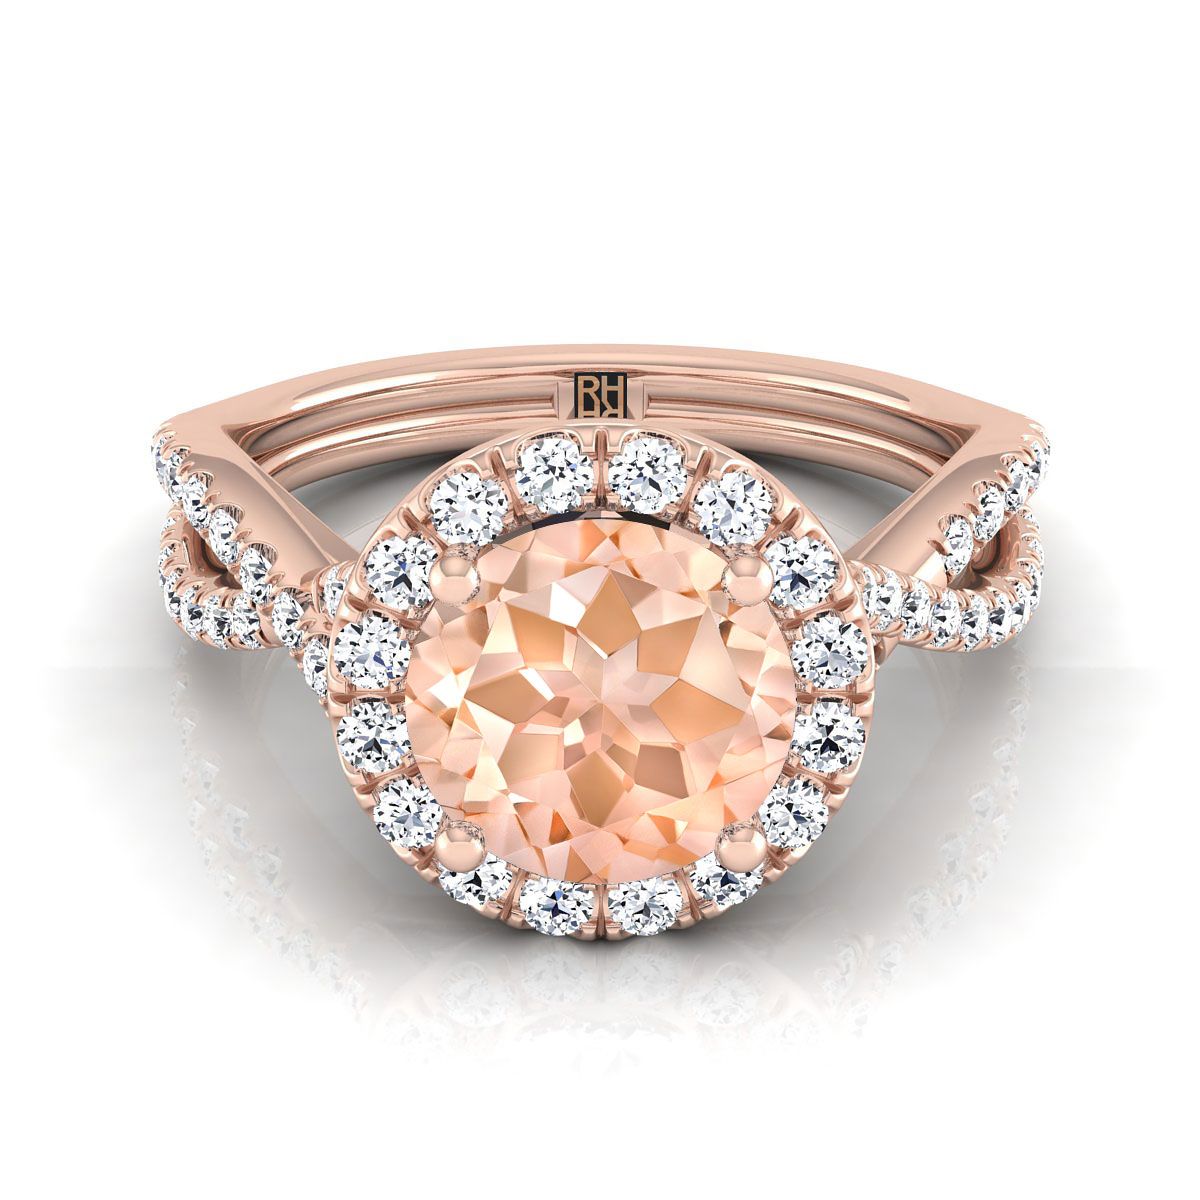 14K Rose Gold Round Brilliant Morganite  Twisted Scalloped Pavé Diamonds Halo Engagement Ring -1/2ctw